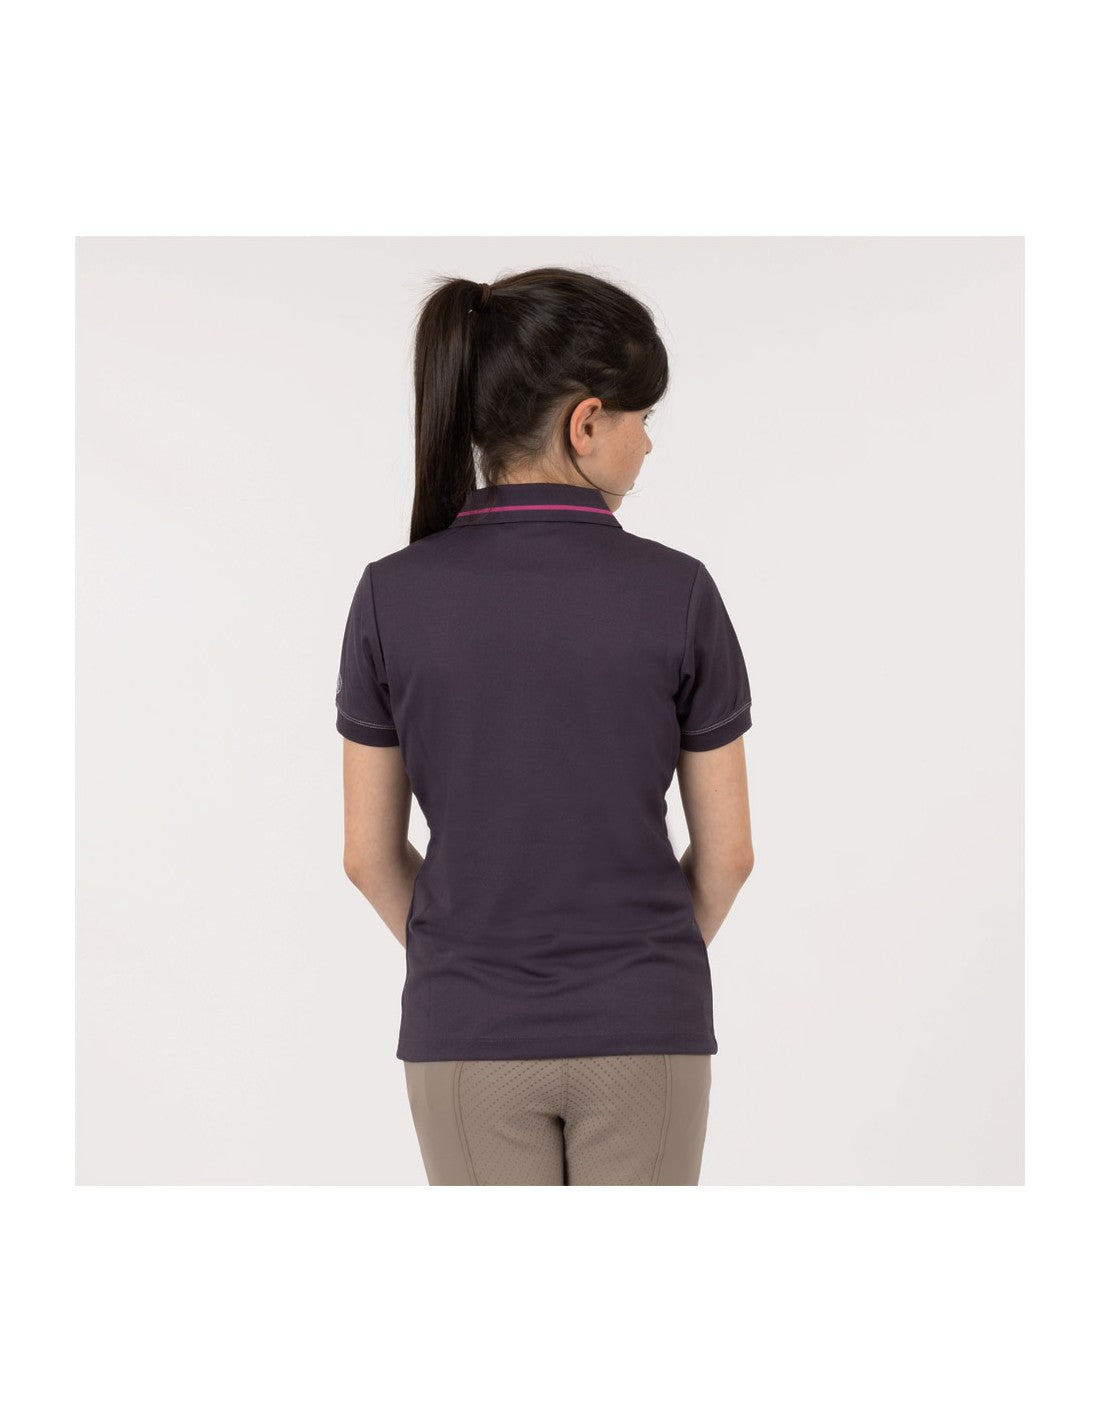 BR 4-EH Chelsy Children's Polo Shirt - Nightshade